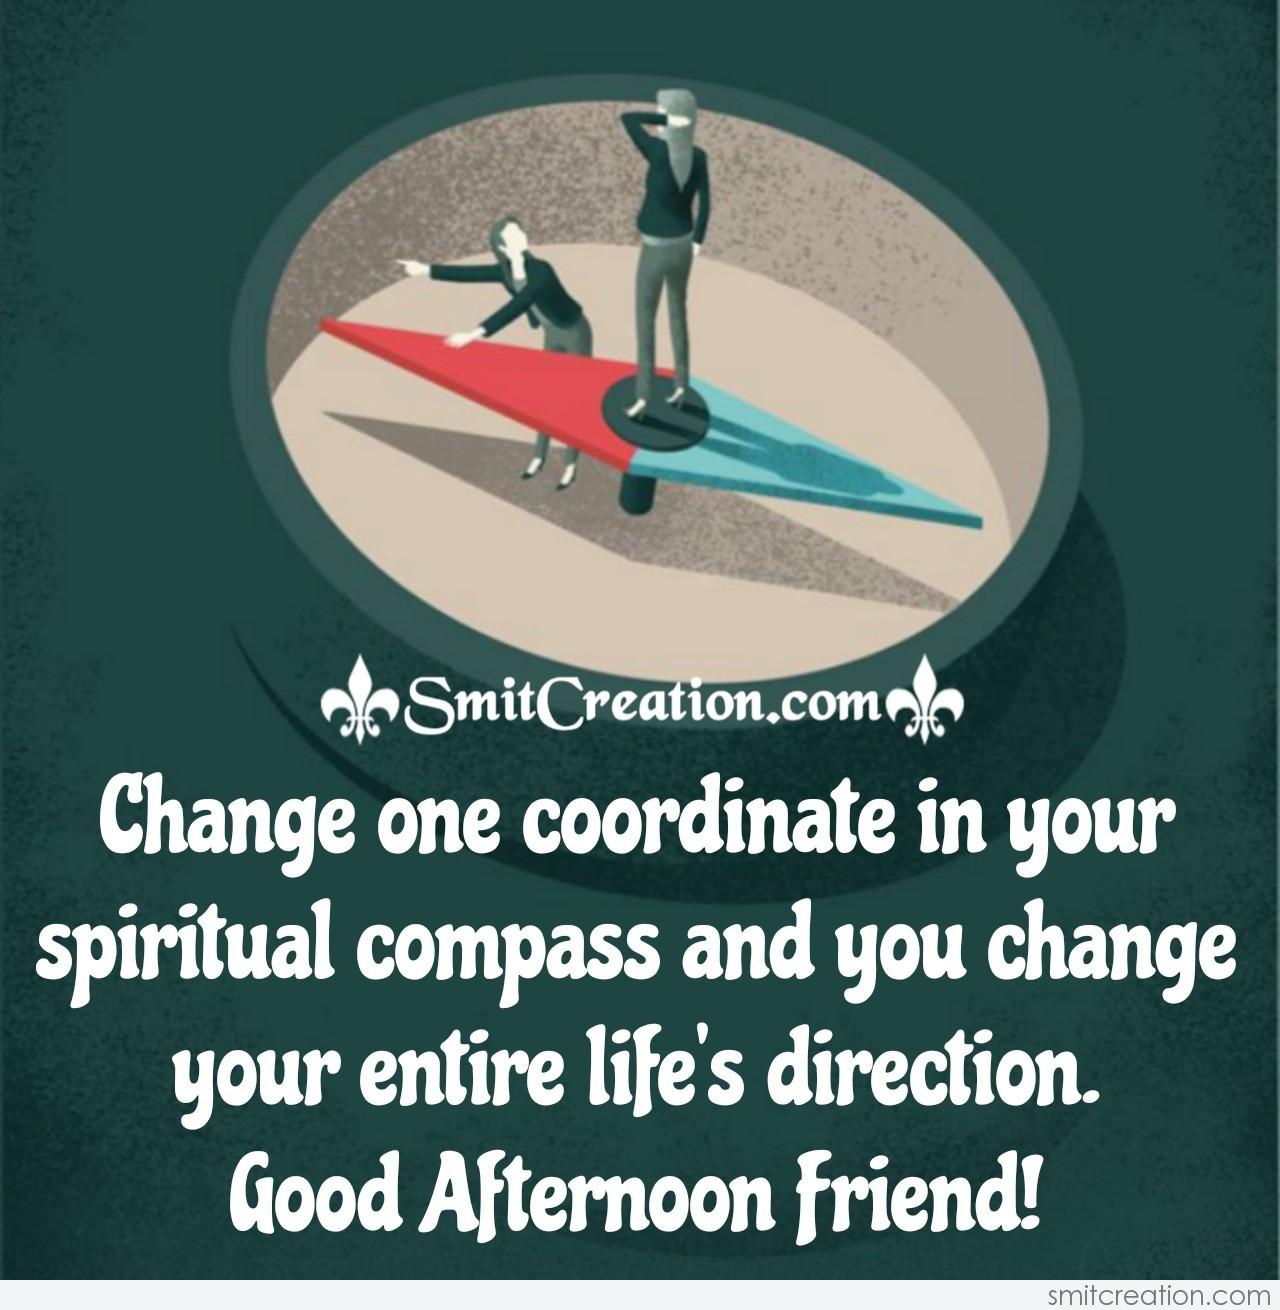 Good Afternoon Friend Quote - SmitCreation.com